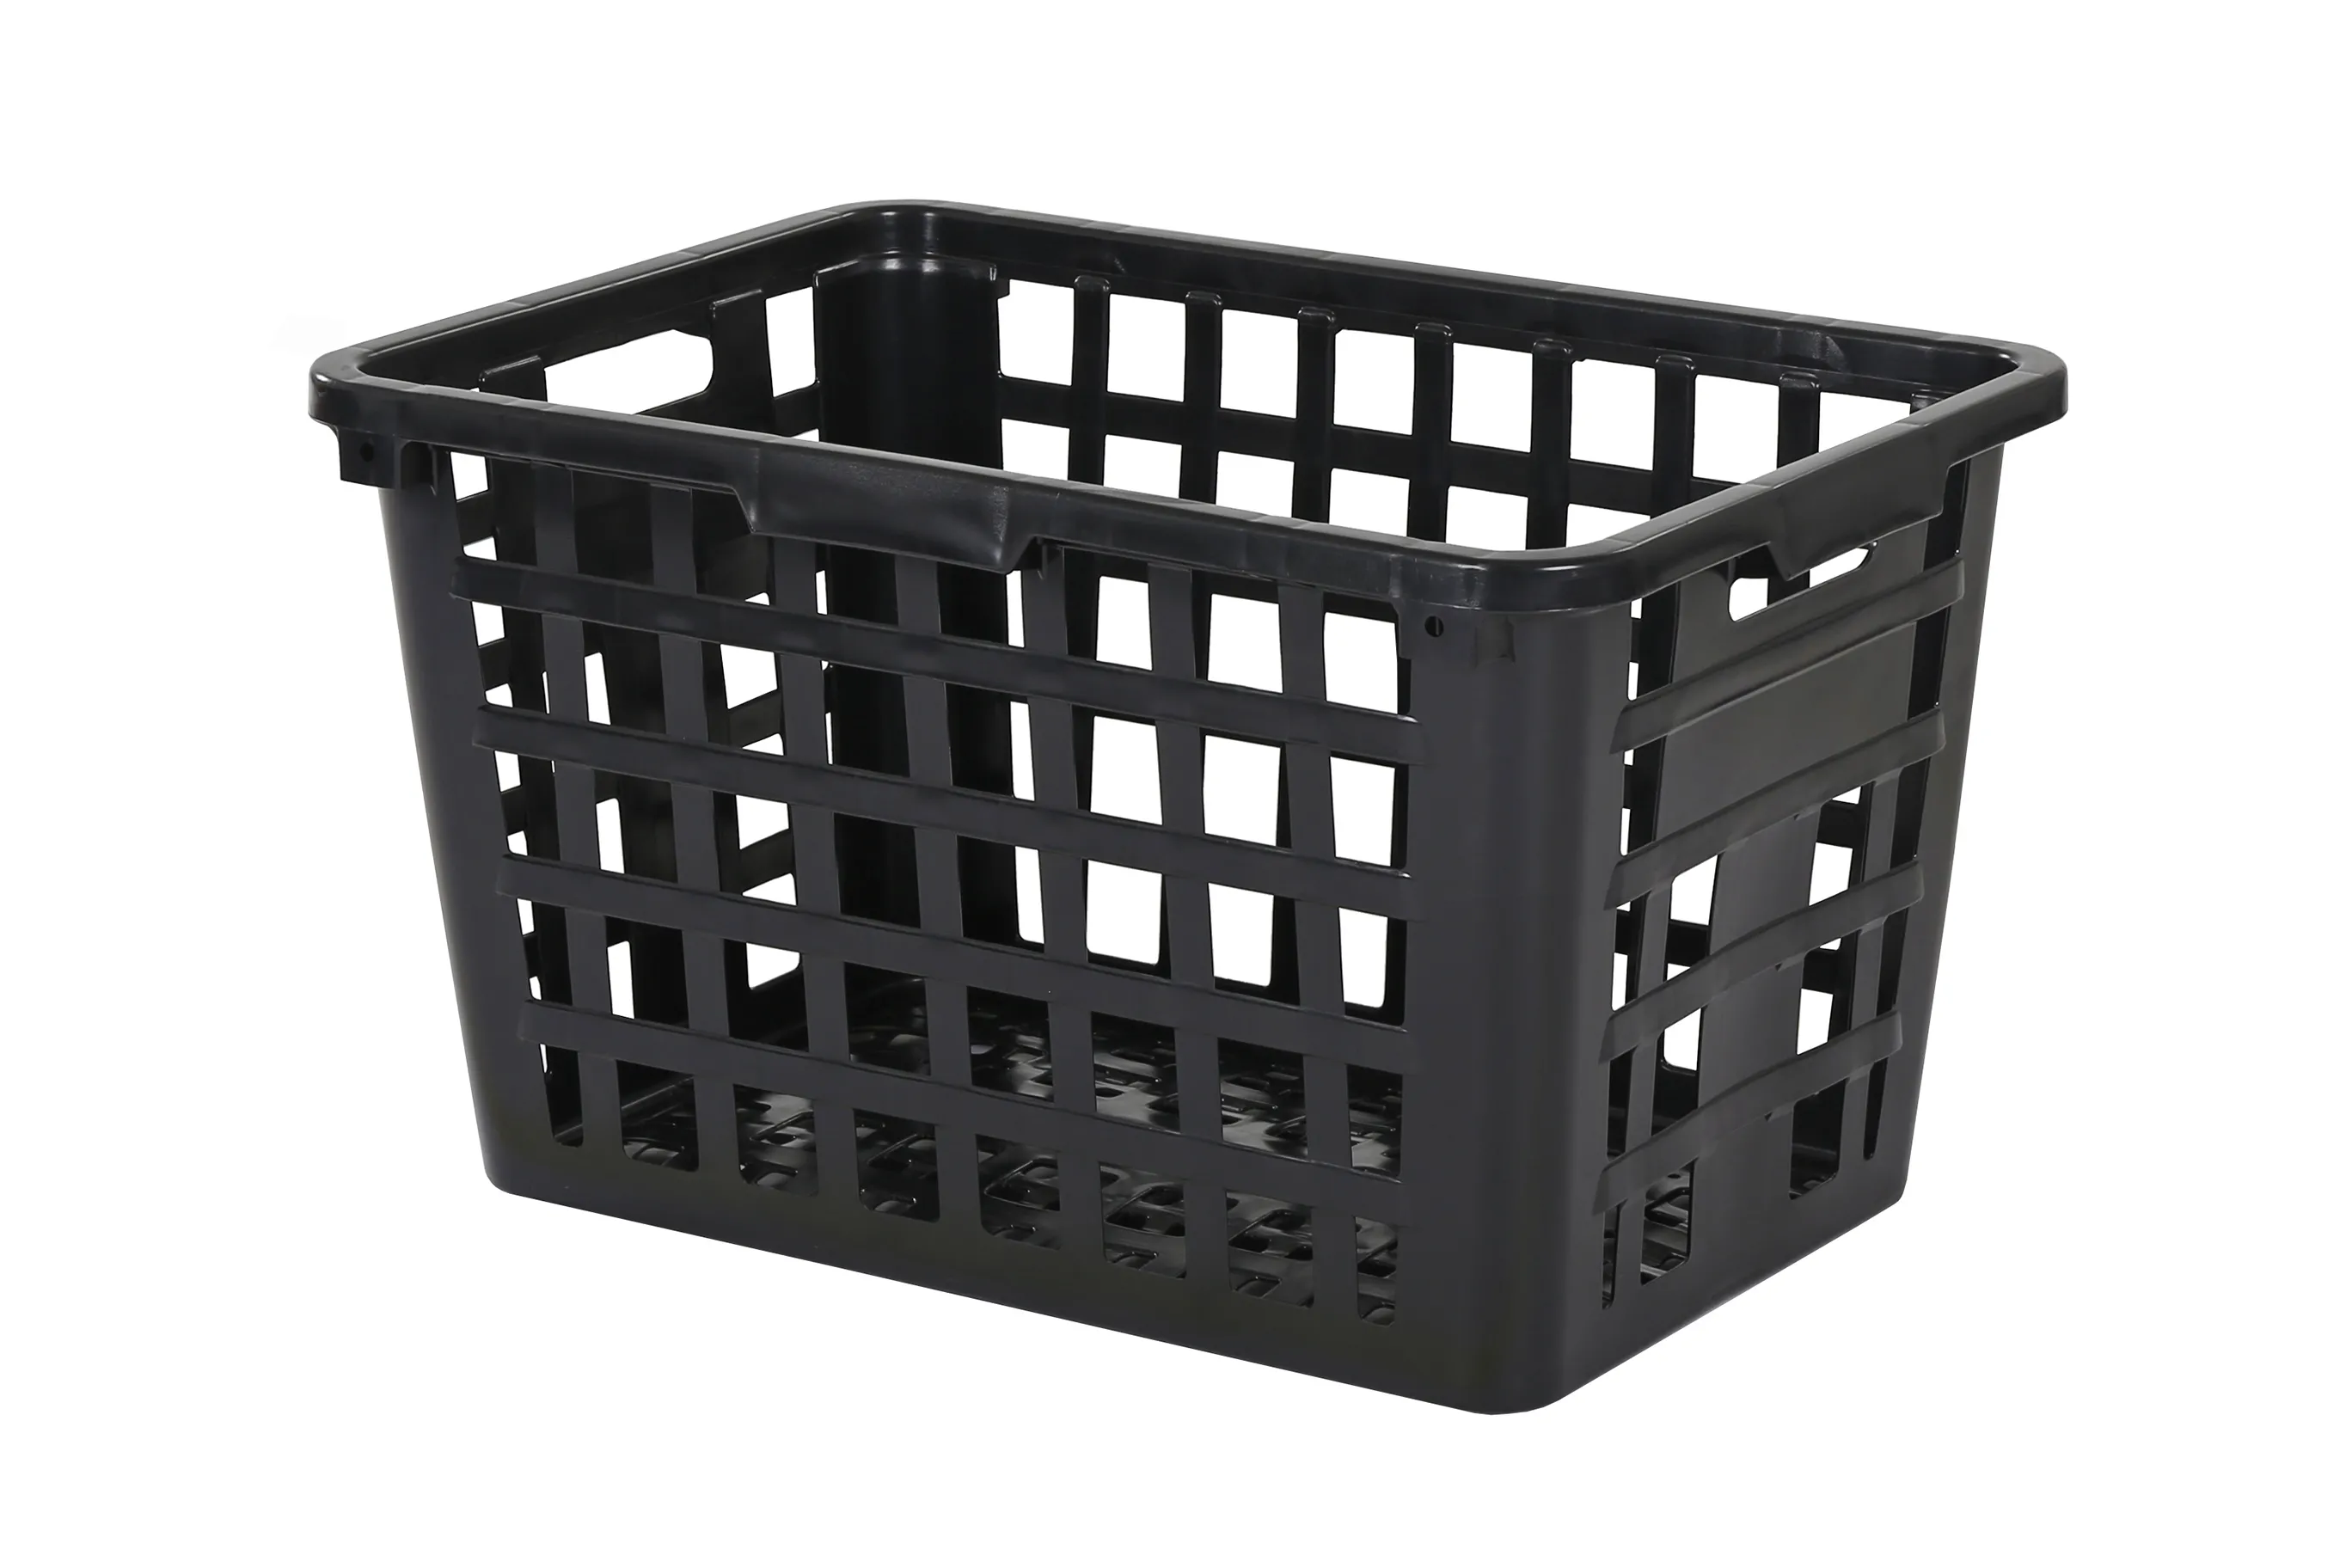 Nestable crate - Washing / textile basket without handles - 795 x 545 x H 457 mm